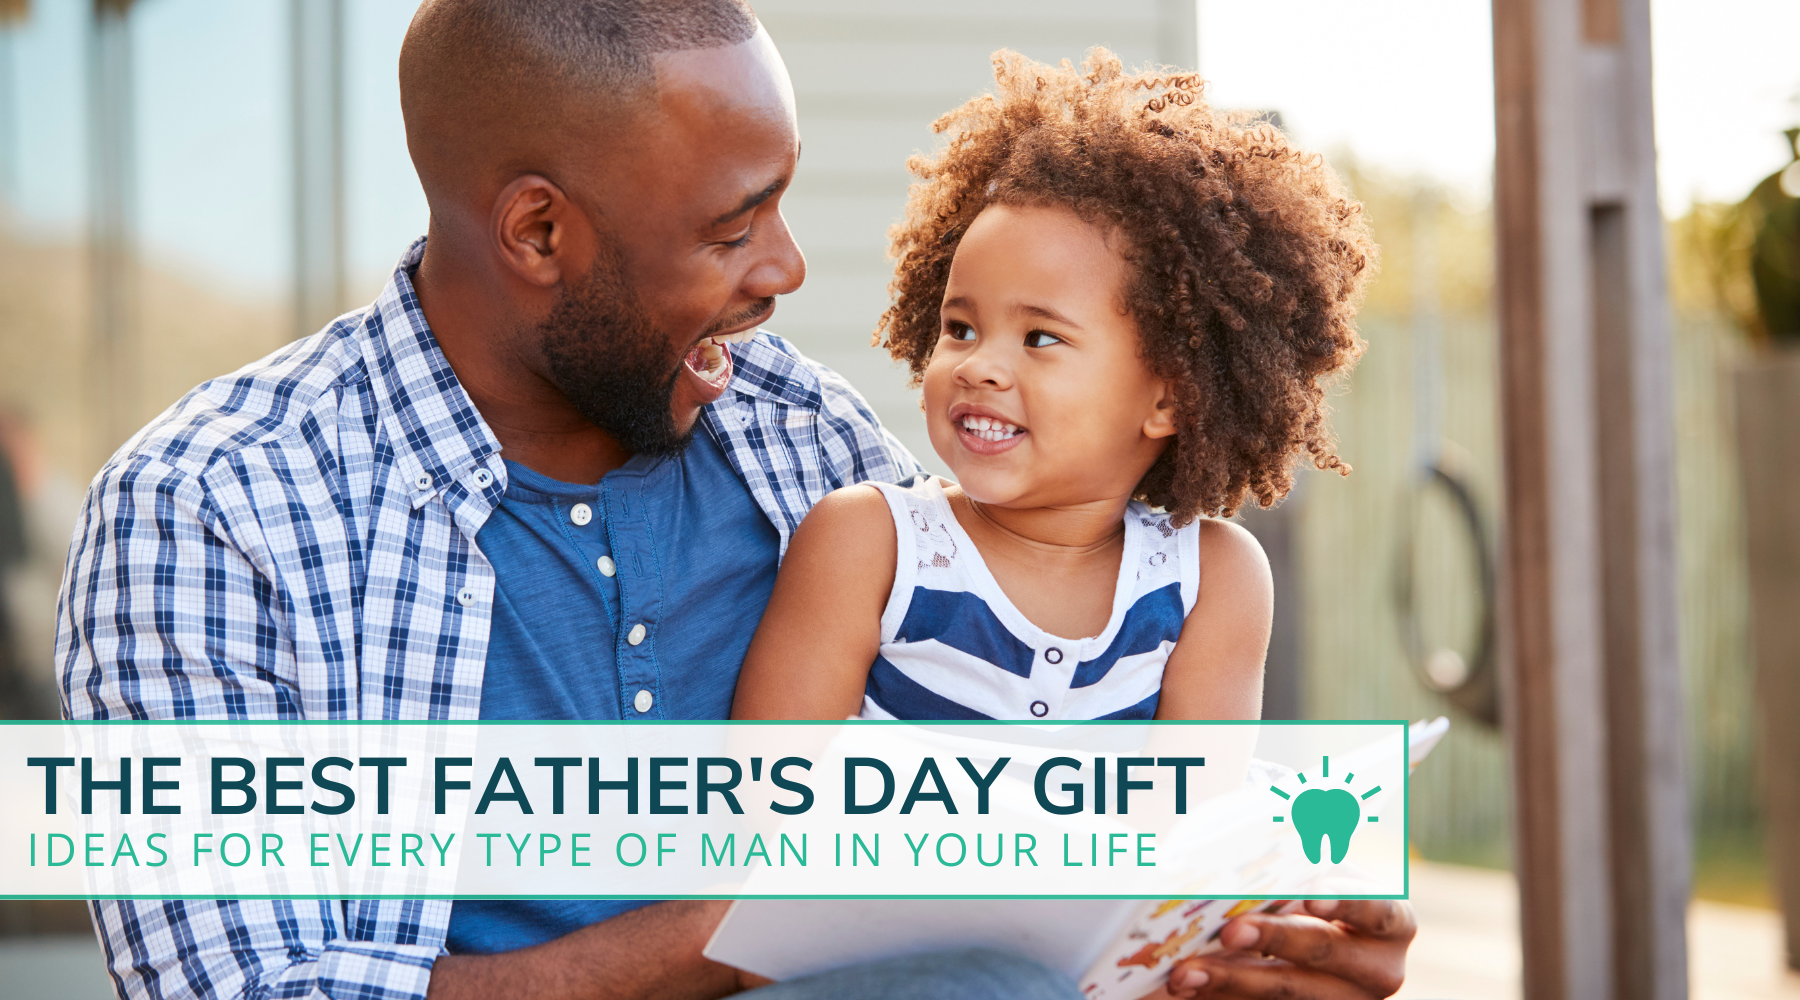 The Best Father's Day Gift Ideas for Every Type of Man In Your Life